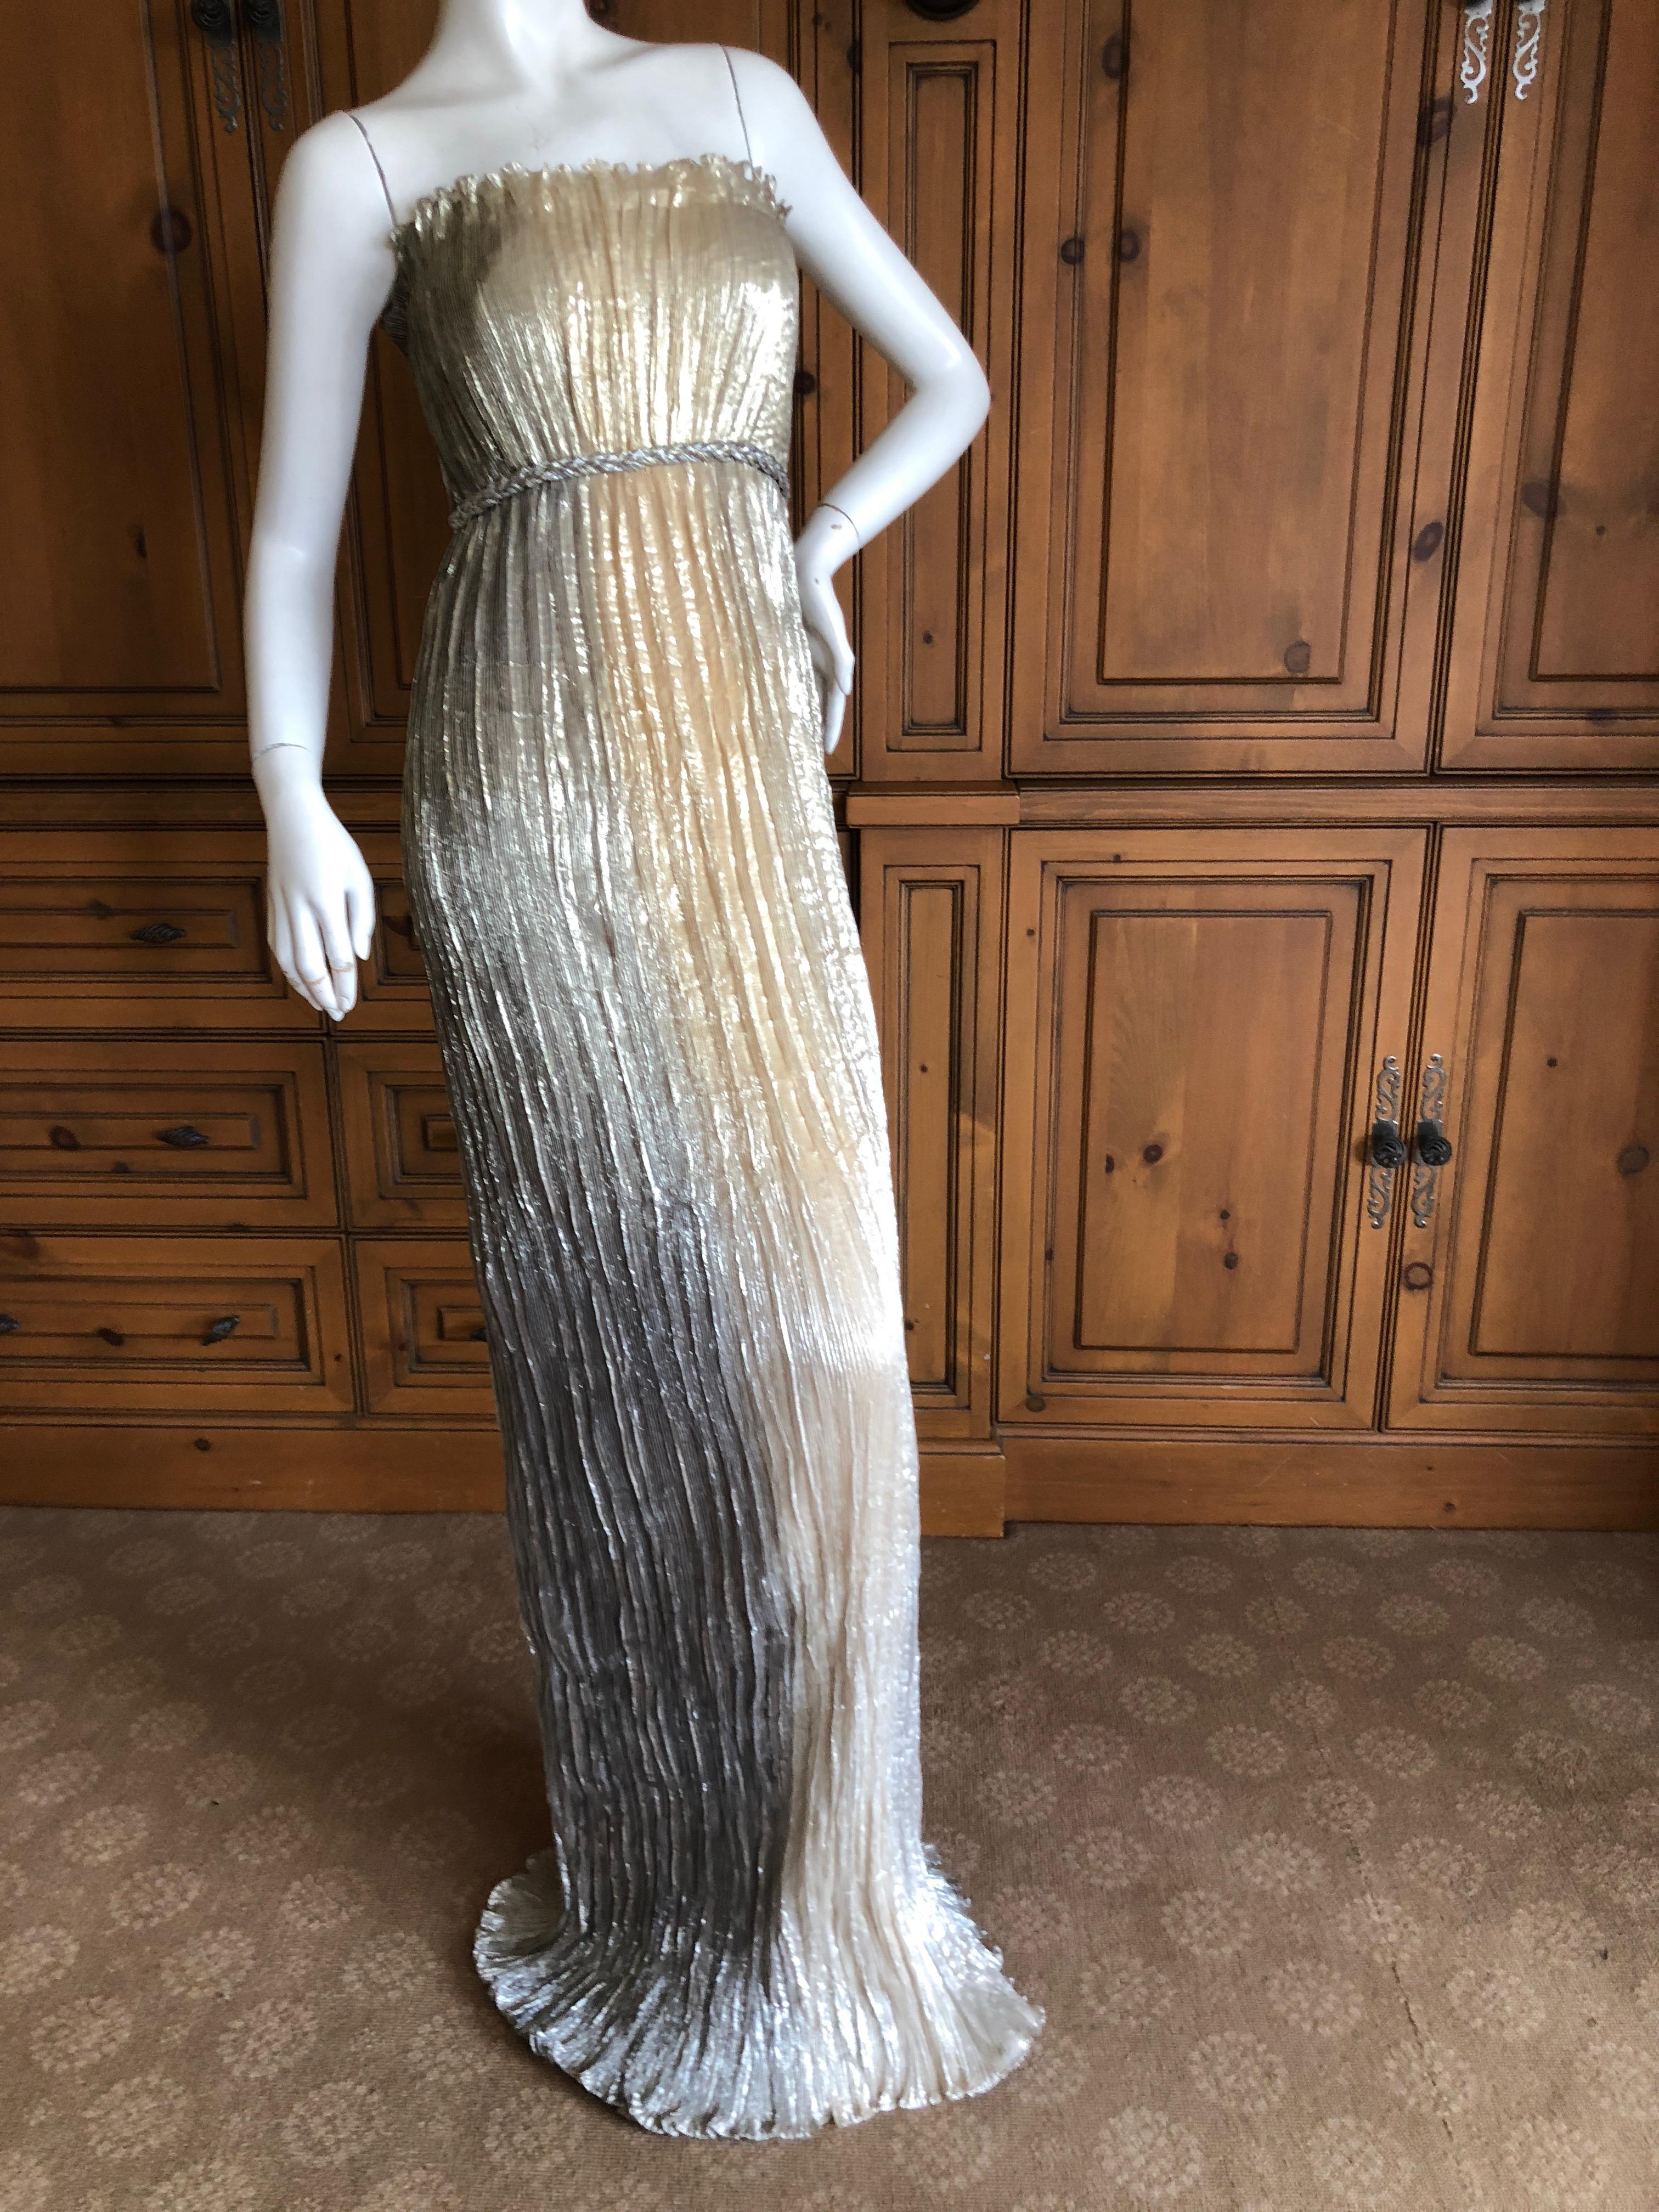 Oscar de la Renta Plisse Pleated Metallic Vintage Strapless Godess Gown.
There is an inner bustier.
Simply Stunning. Please use the zoom feature to see al the remarkable details.
Size 6
Bust 36